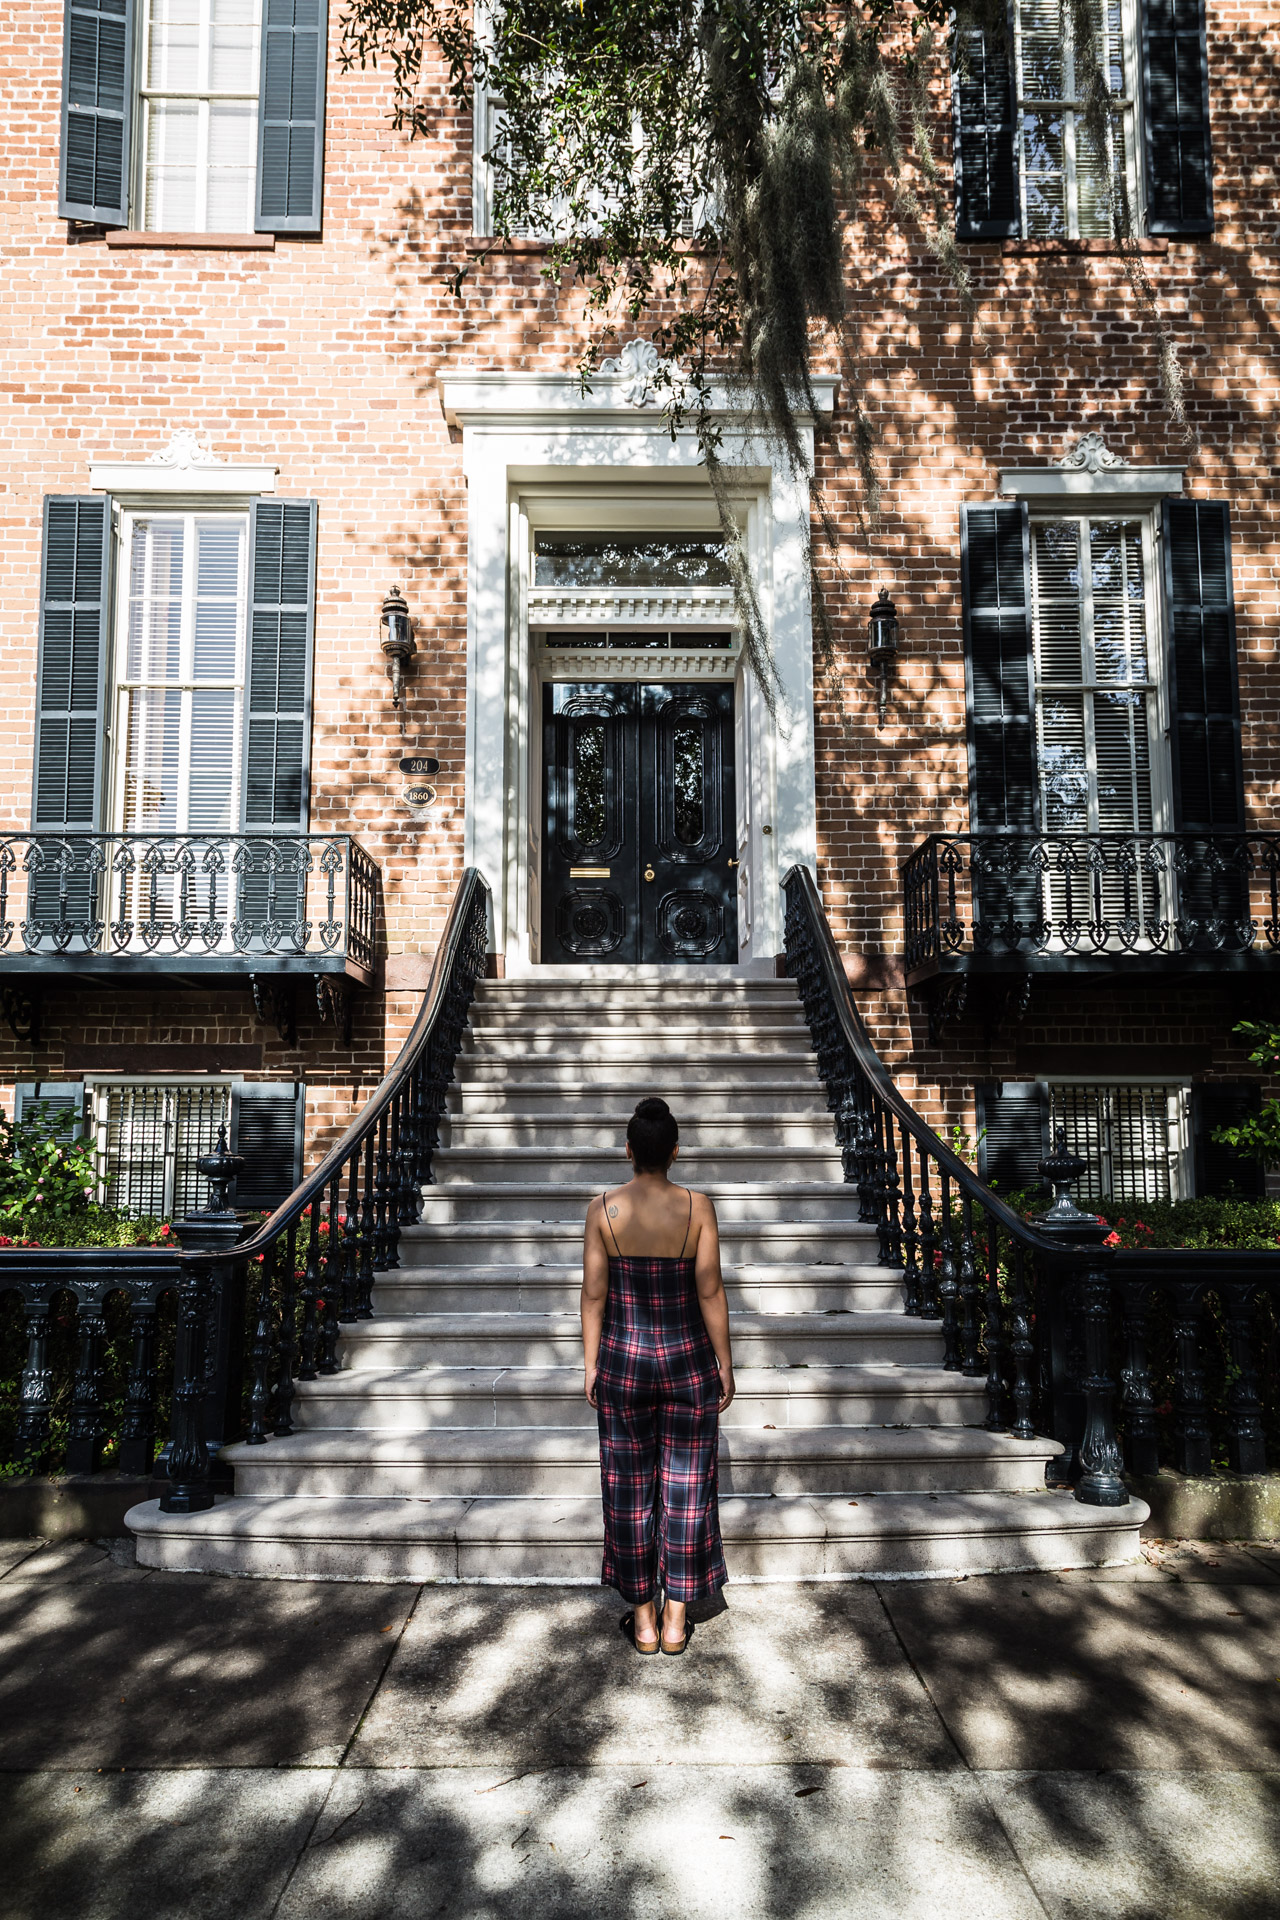 Getting To Know Savannah (grand stairs)